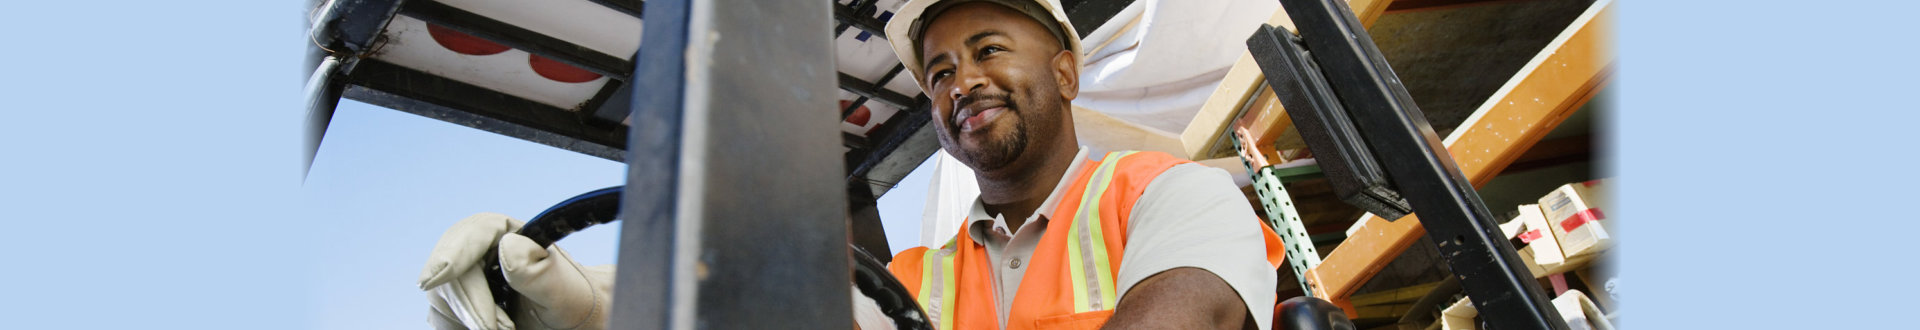 Low angle view of a happy male industrial worker driving forklift at workplace